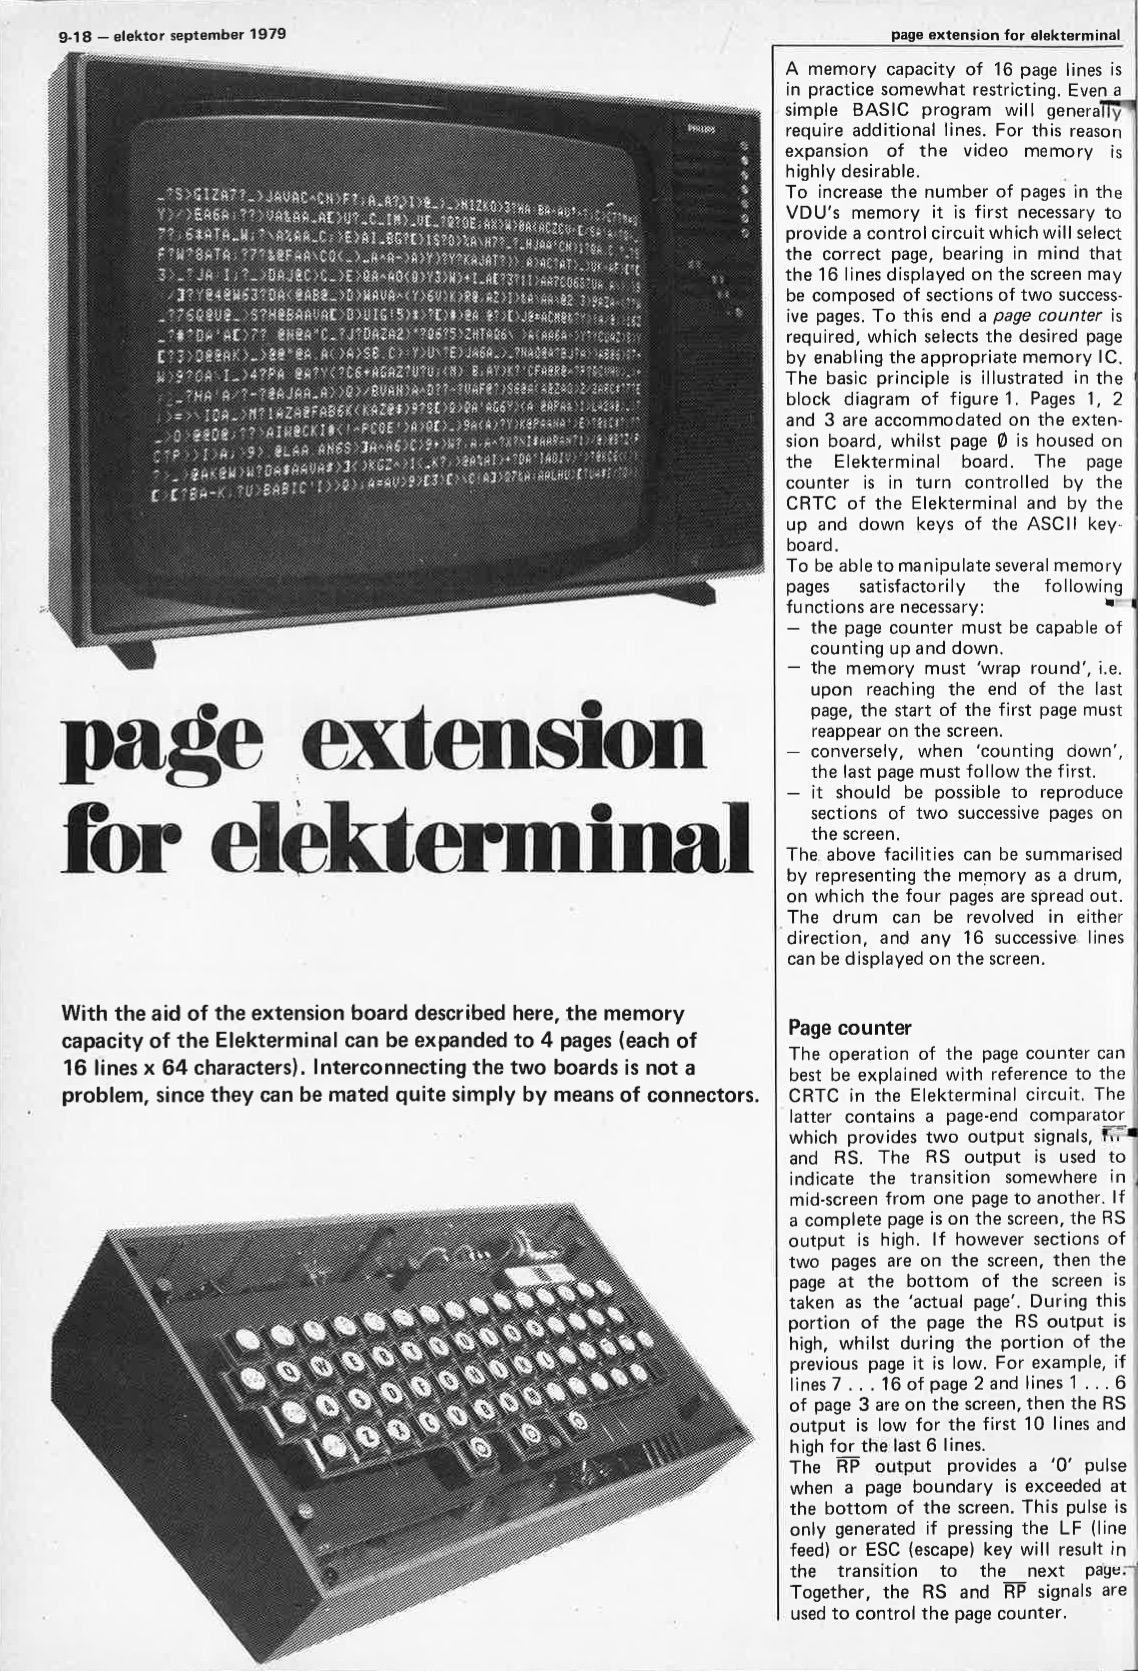 page ex tension for the Elekterminal